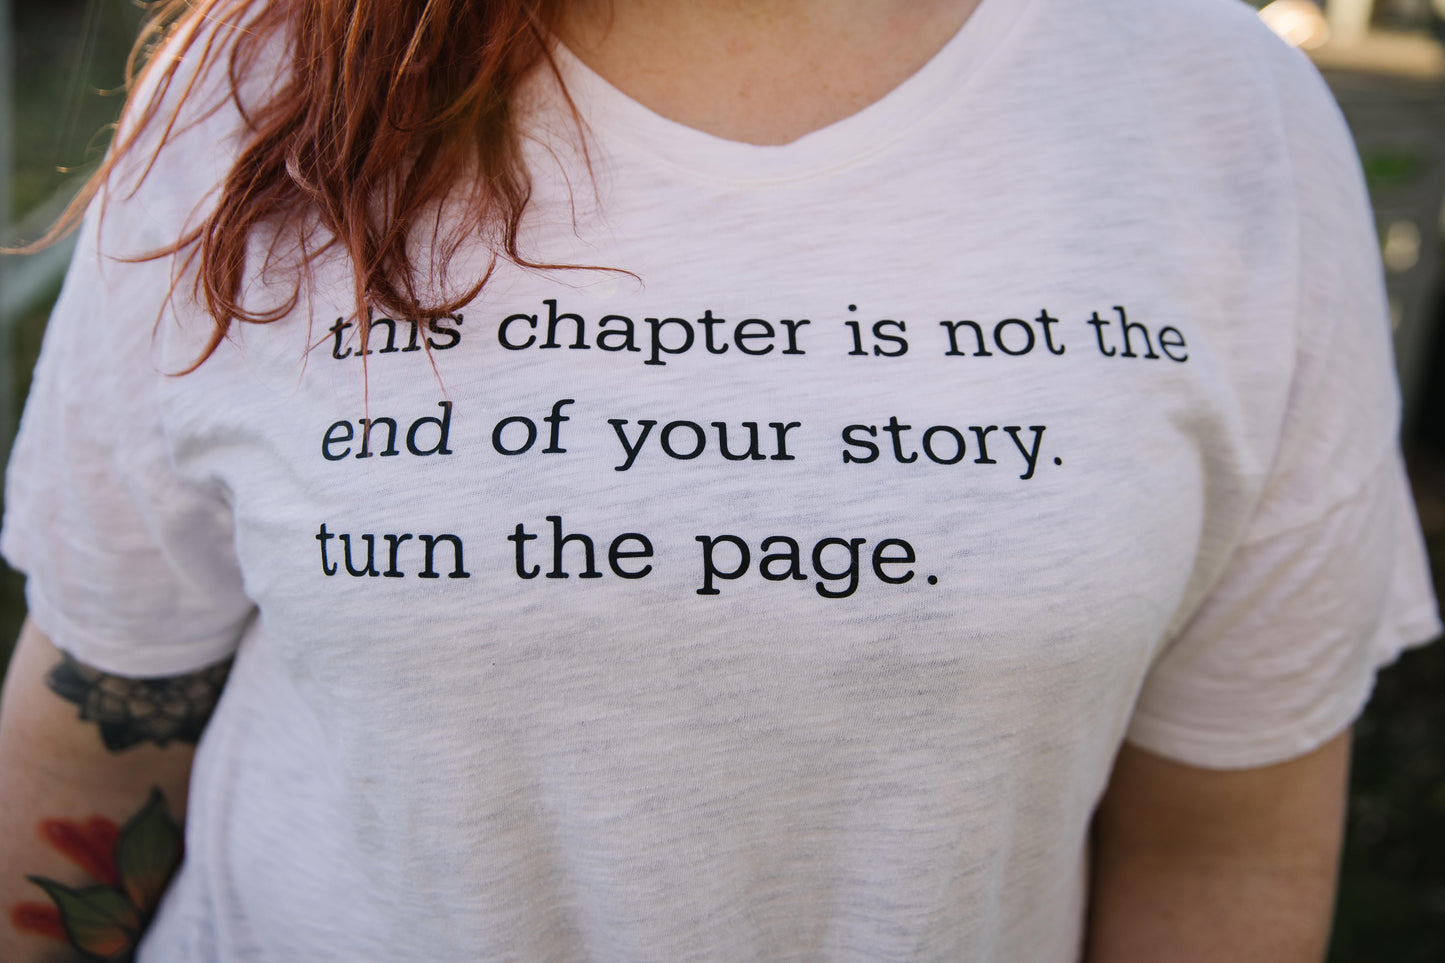 this chapter is not the end... (XL)